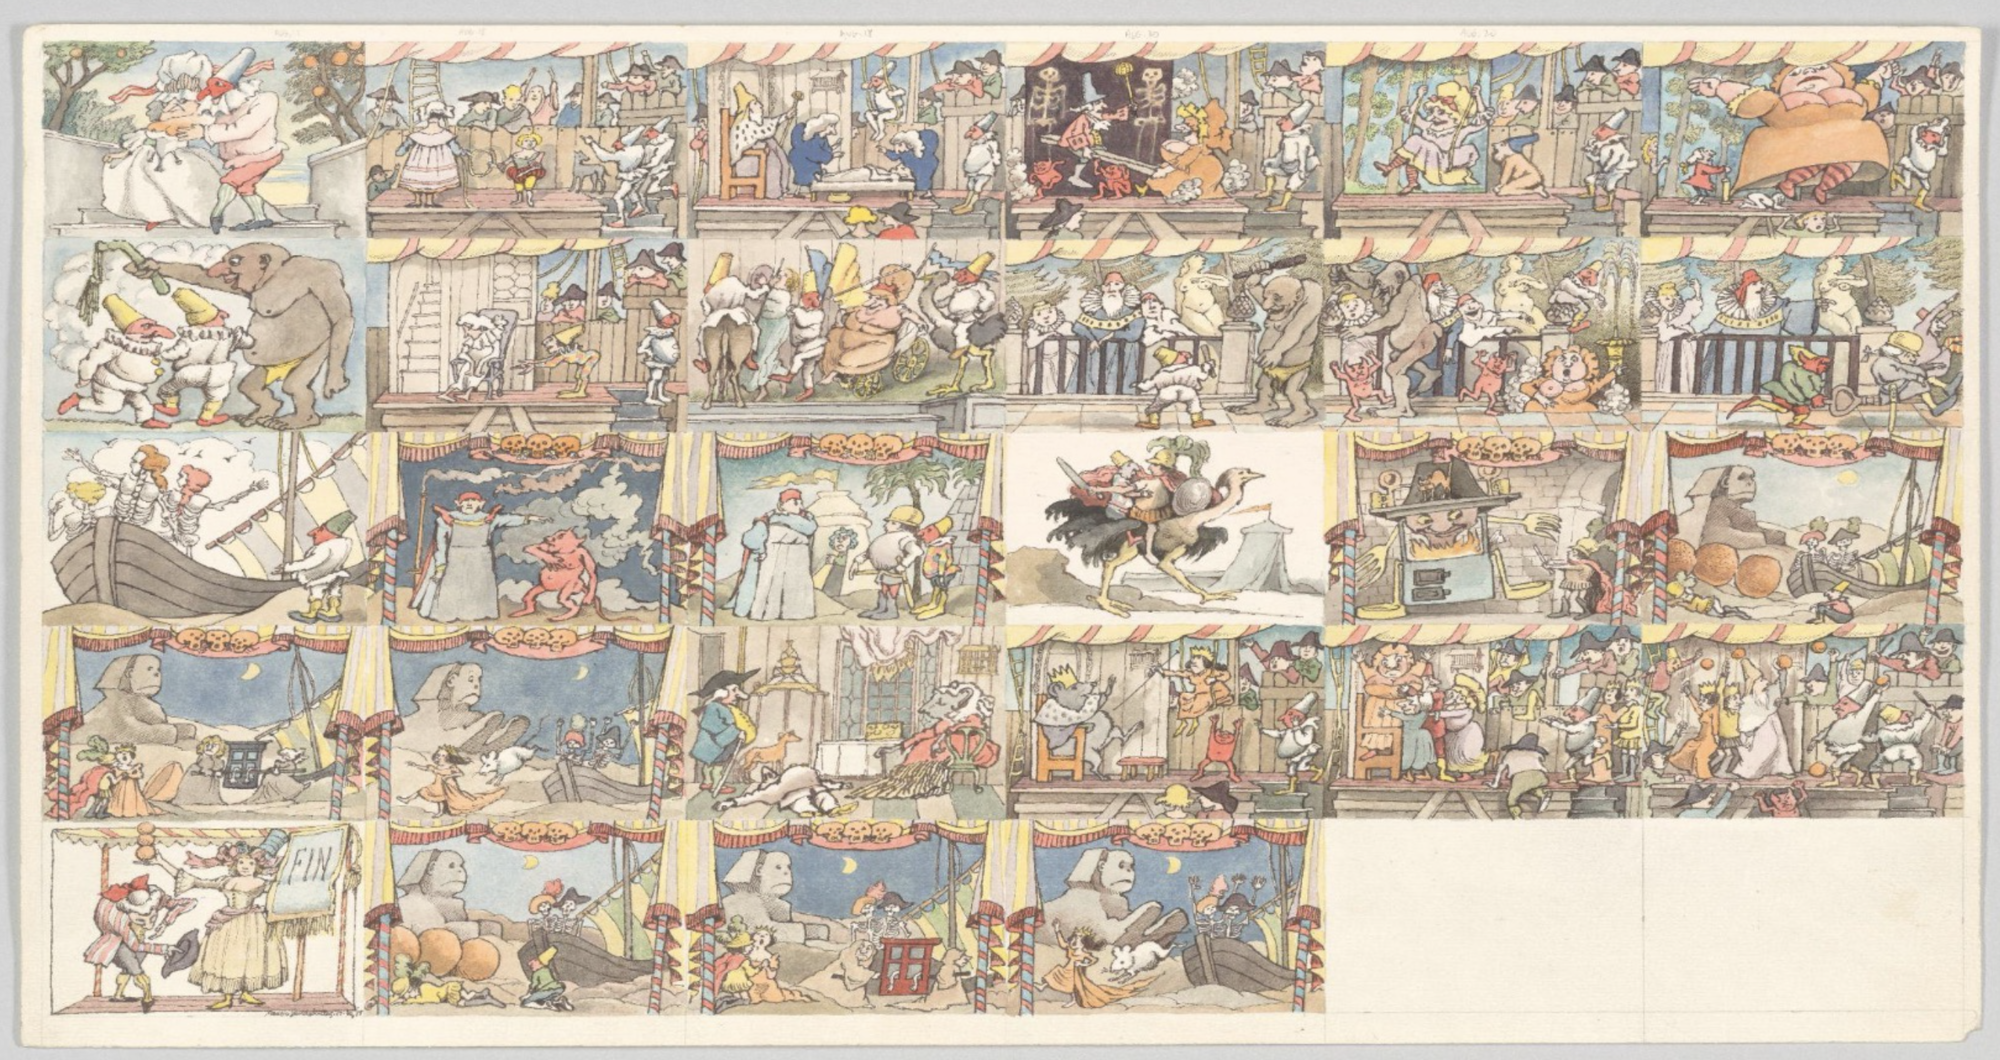 This colorful watercolor is a storyboard for The Love for Three Oranges. In rows of small squares from left to right, and then top to bottom the artist illustrates individual scenes of the opera. 